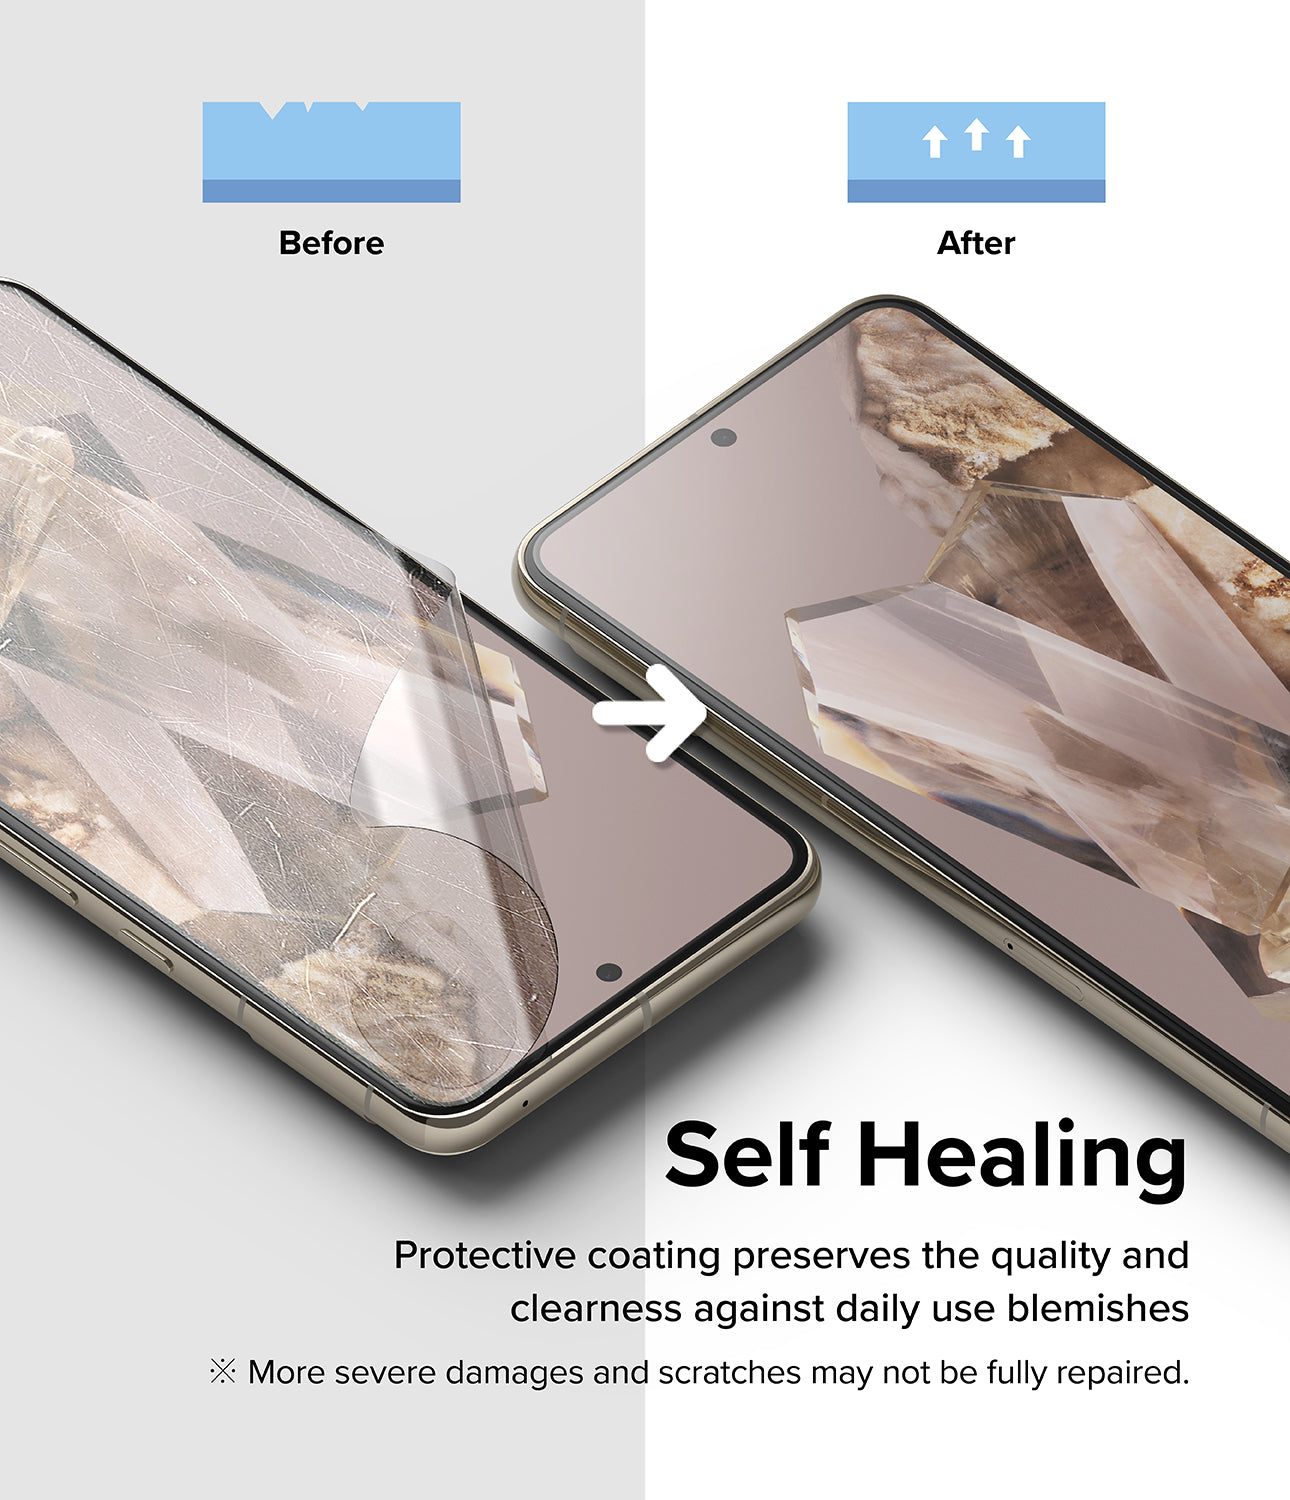 Google Pixel 8 Pro Screen Protector | Dual Easy Film-Self Healing Protective coating preserves that quality and clearness against daily use blemishes. Before and after comparison.